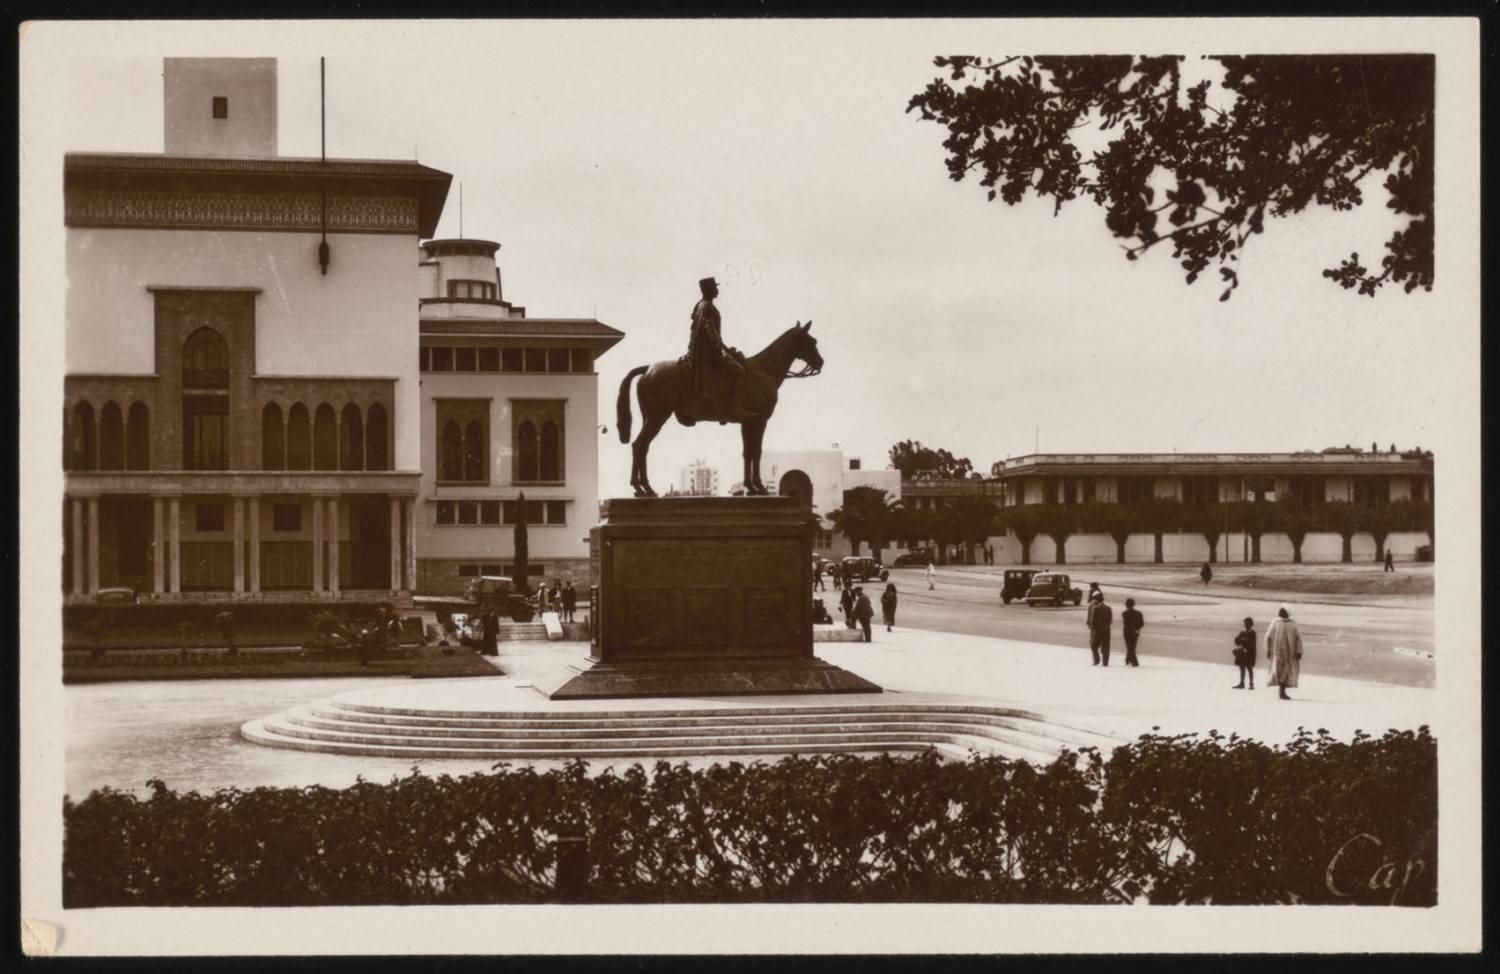 View of Mohammed V Square with the equestrian statue of General Lyautey designed before it was moved to the French Consulate